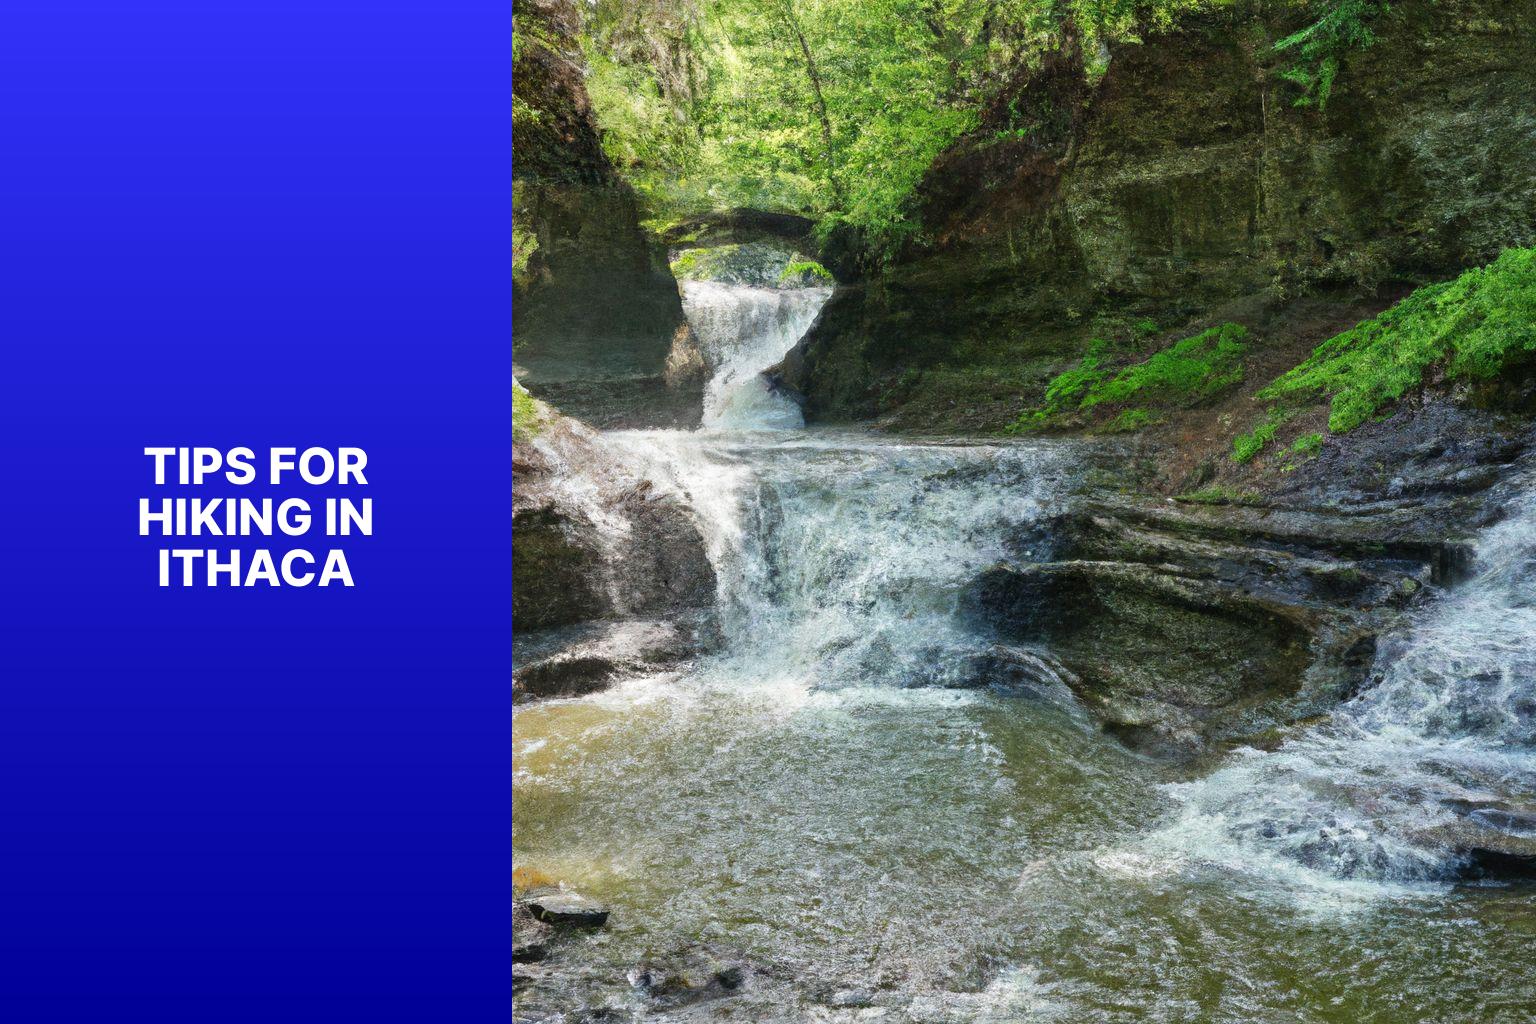 Tips for Hiking in Ithaca - Hikes in Ithaca 